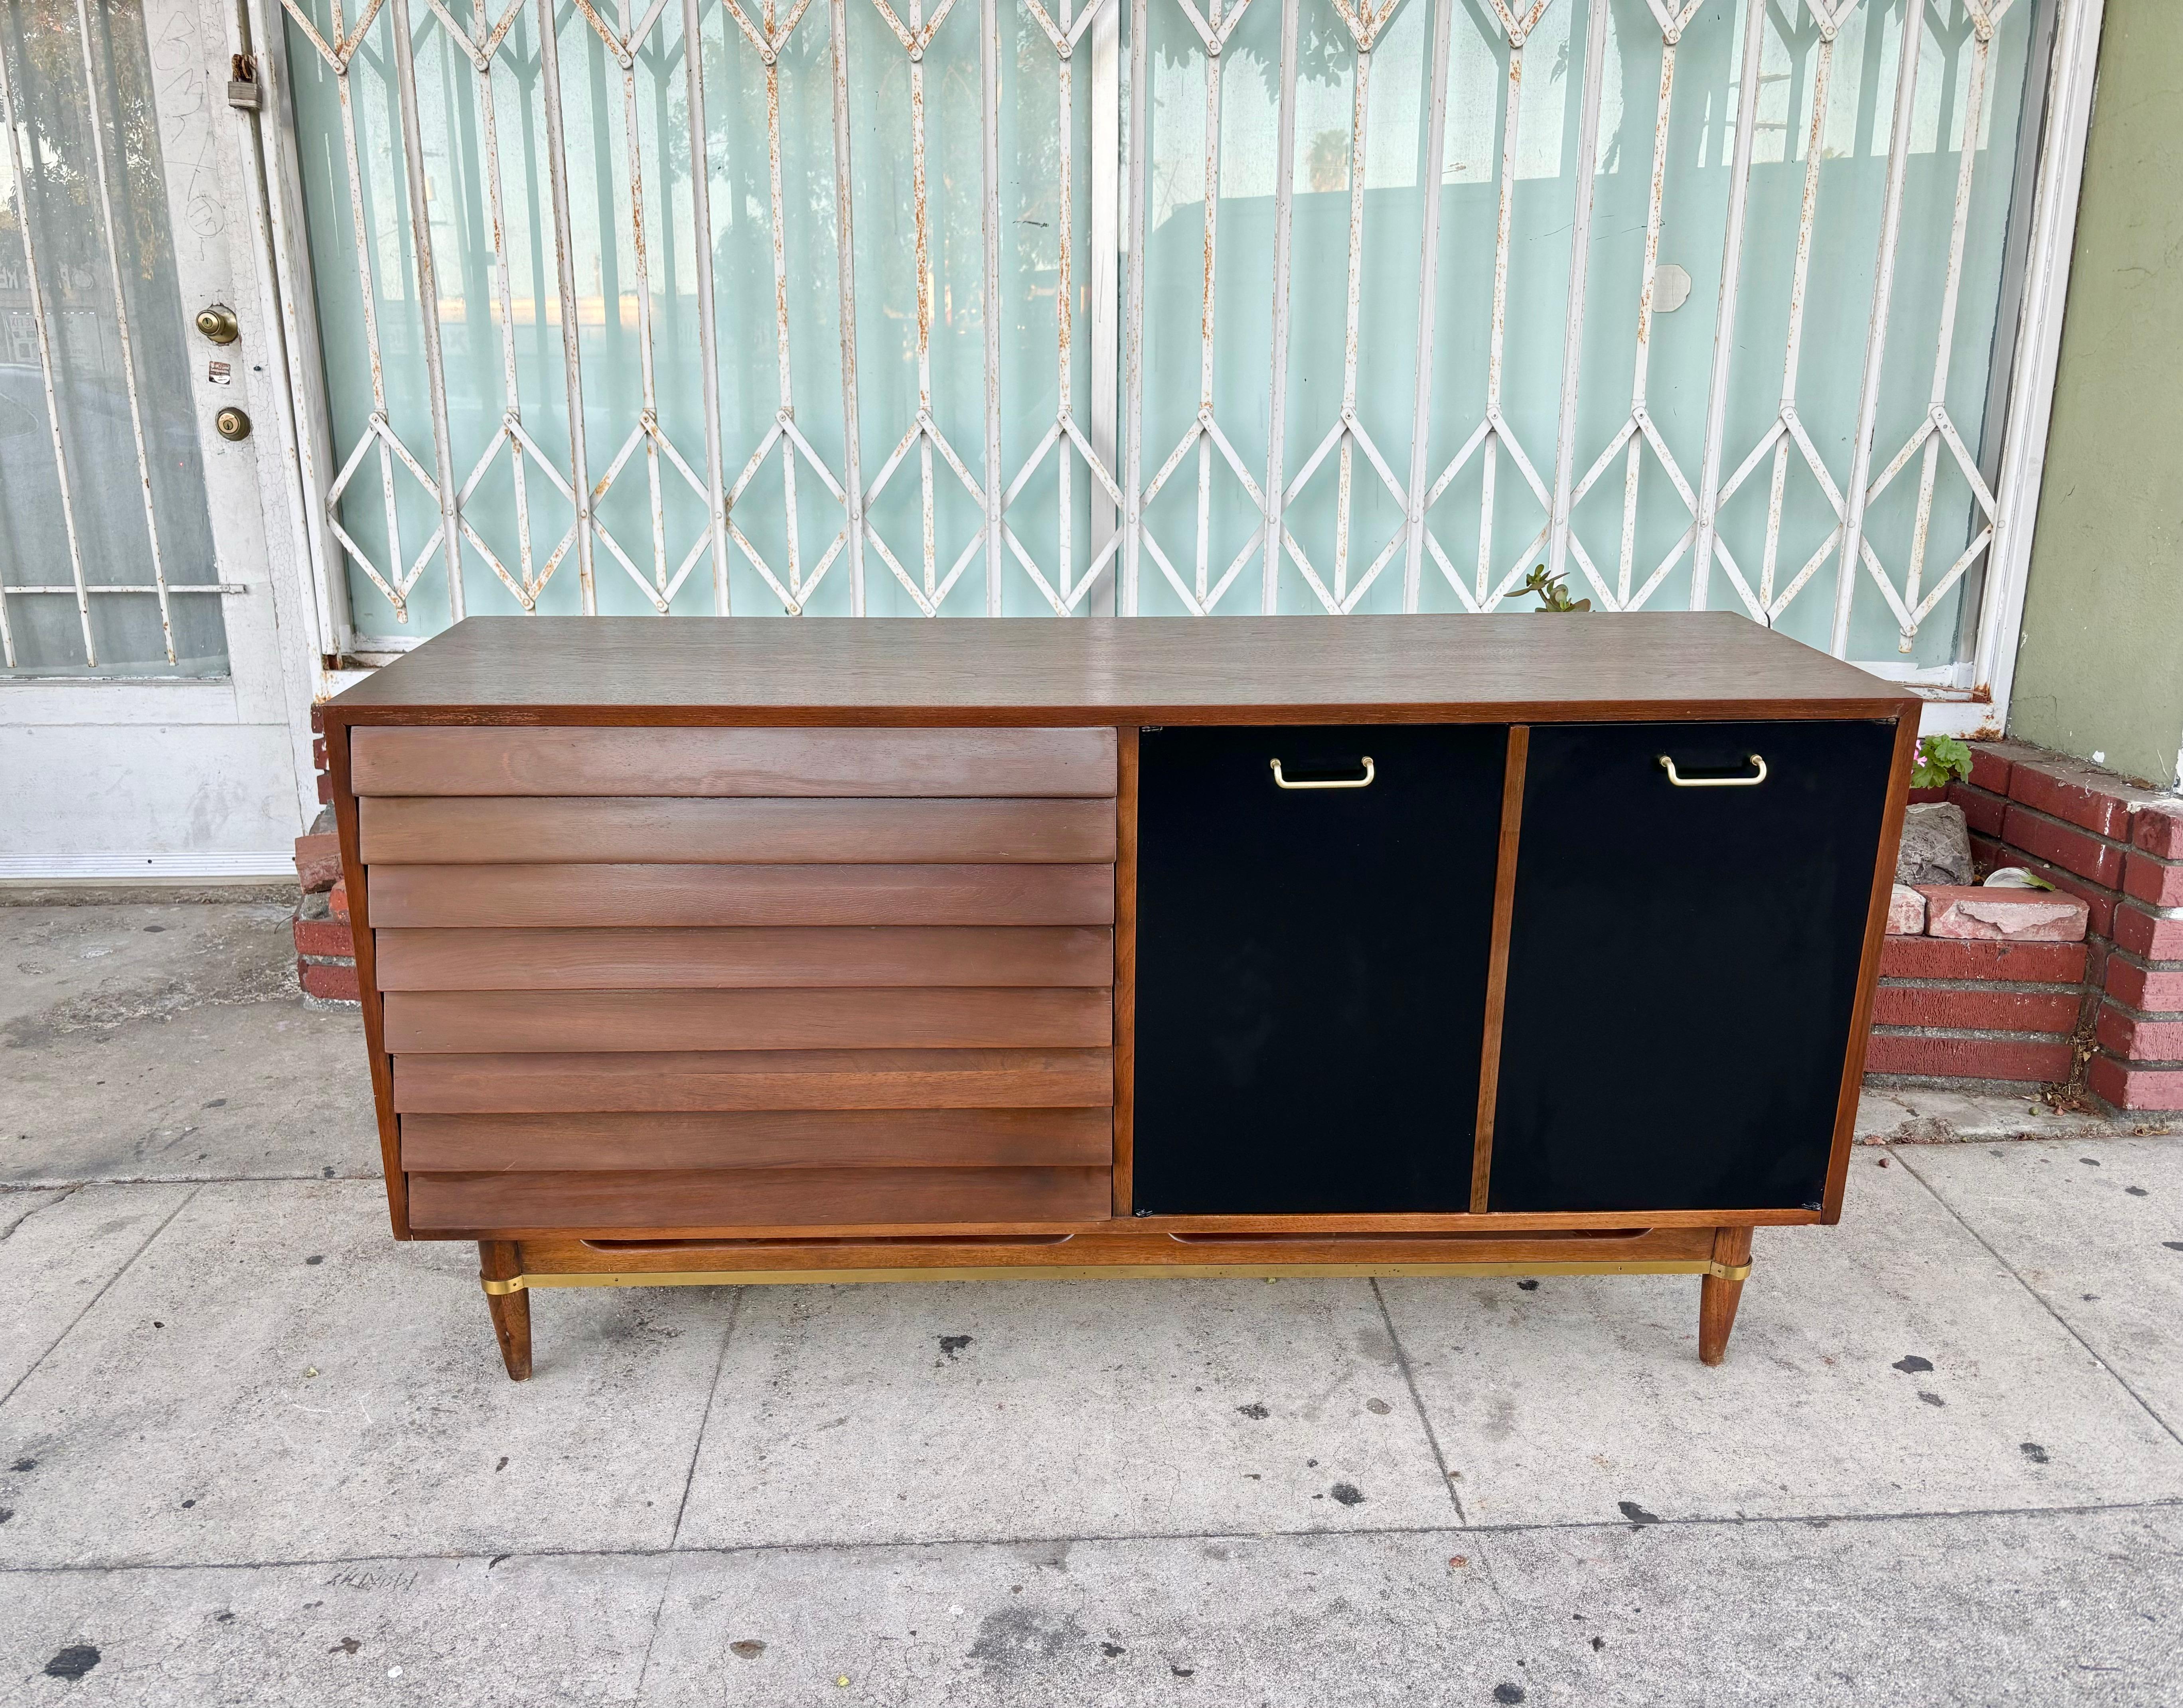 Mid-century walnut dresser designed by Merton L. Gershun and manufactured by American of Martinville. This dresser features a walnut frame with three spacious dovetail drawers on the left side, while the right side features two elegant black doors